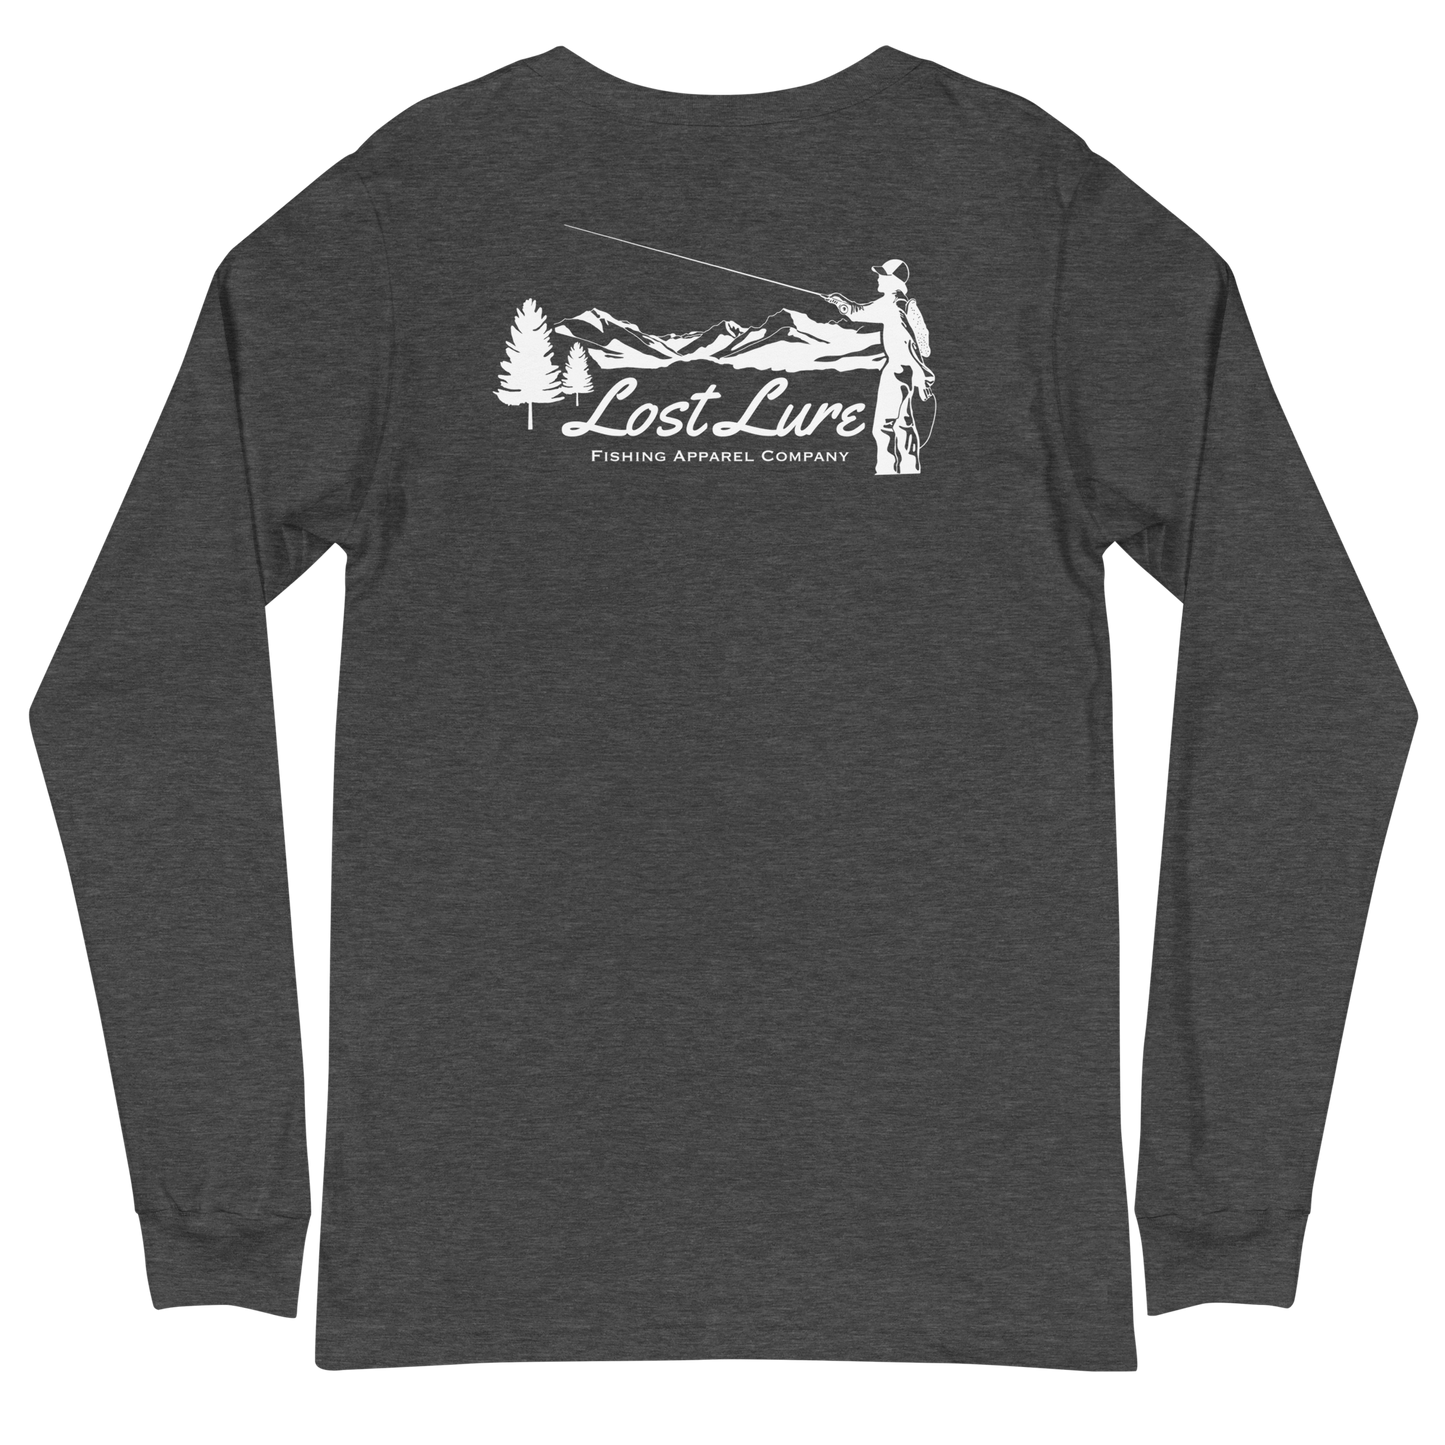 Fly fishing Lost lure long sleeve shirt. It has a design on the back of the shirt black and white outline a fly fisherman and the Rocky Mountains. Grey fishing shirt, back side